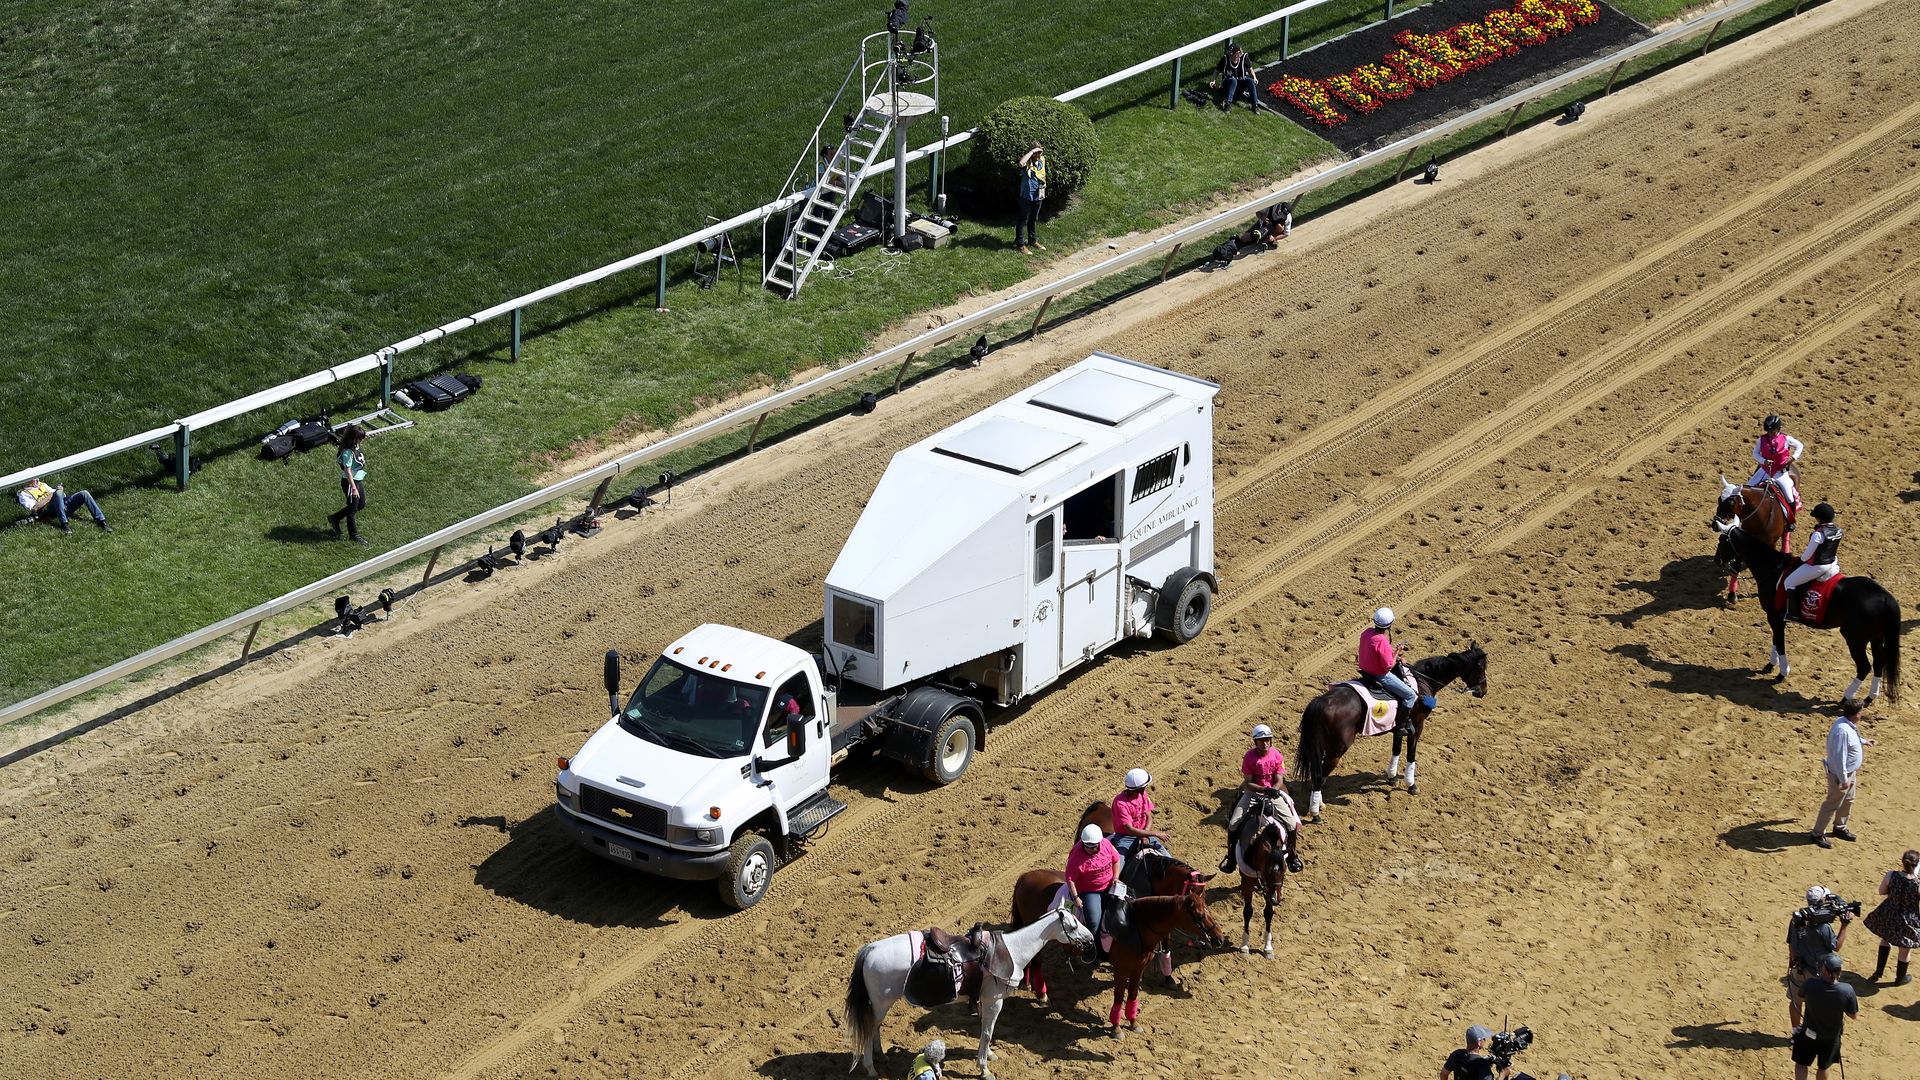 A horse ambulance retrieves a horse body from the race course